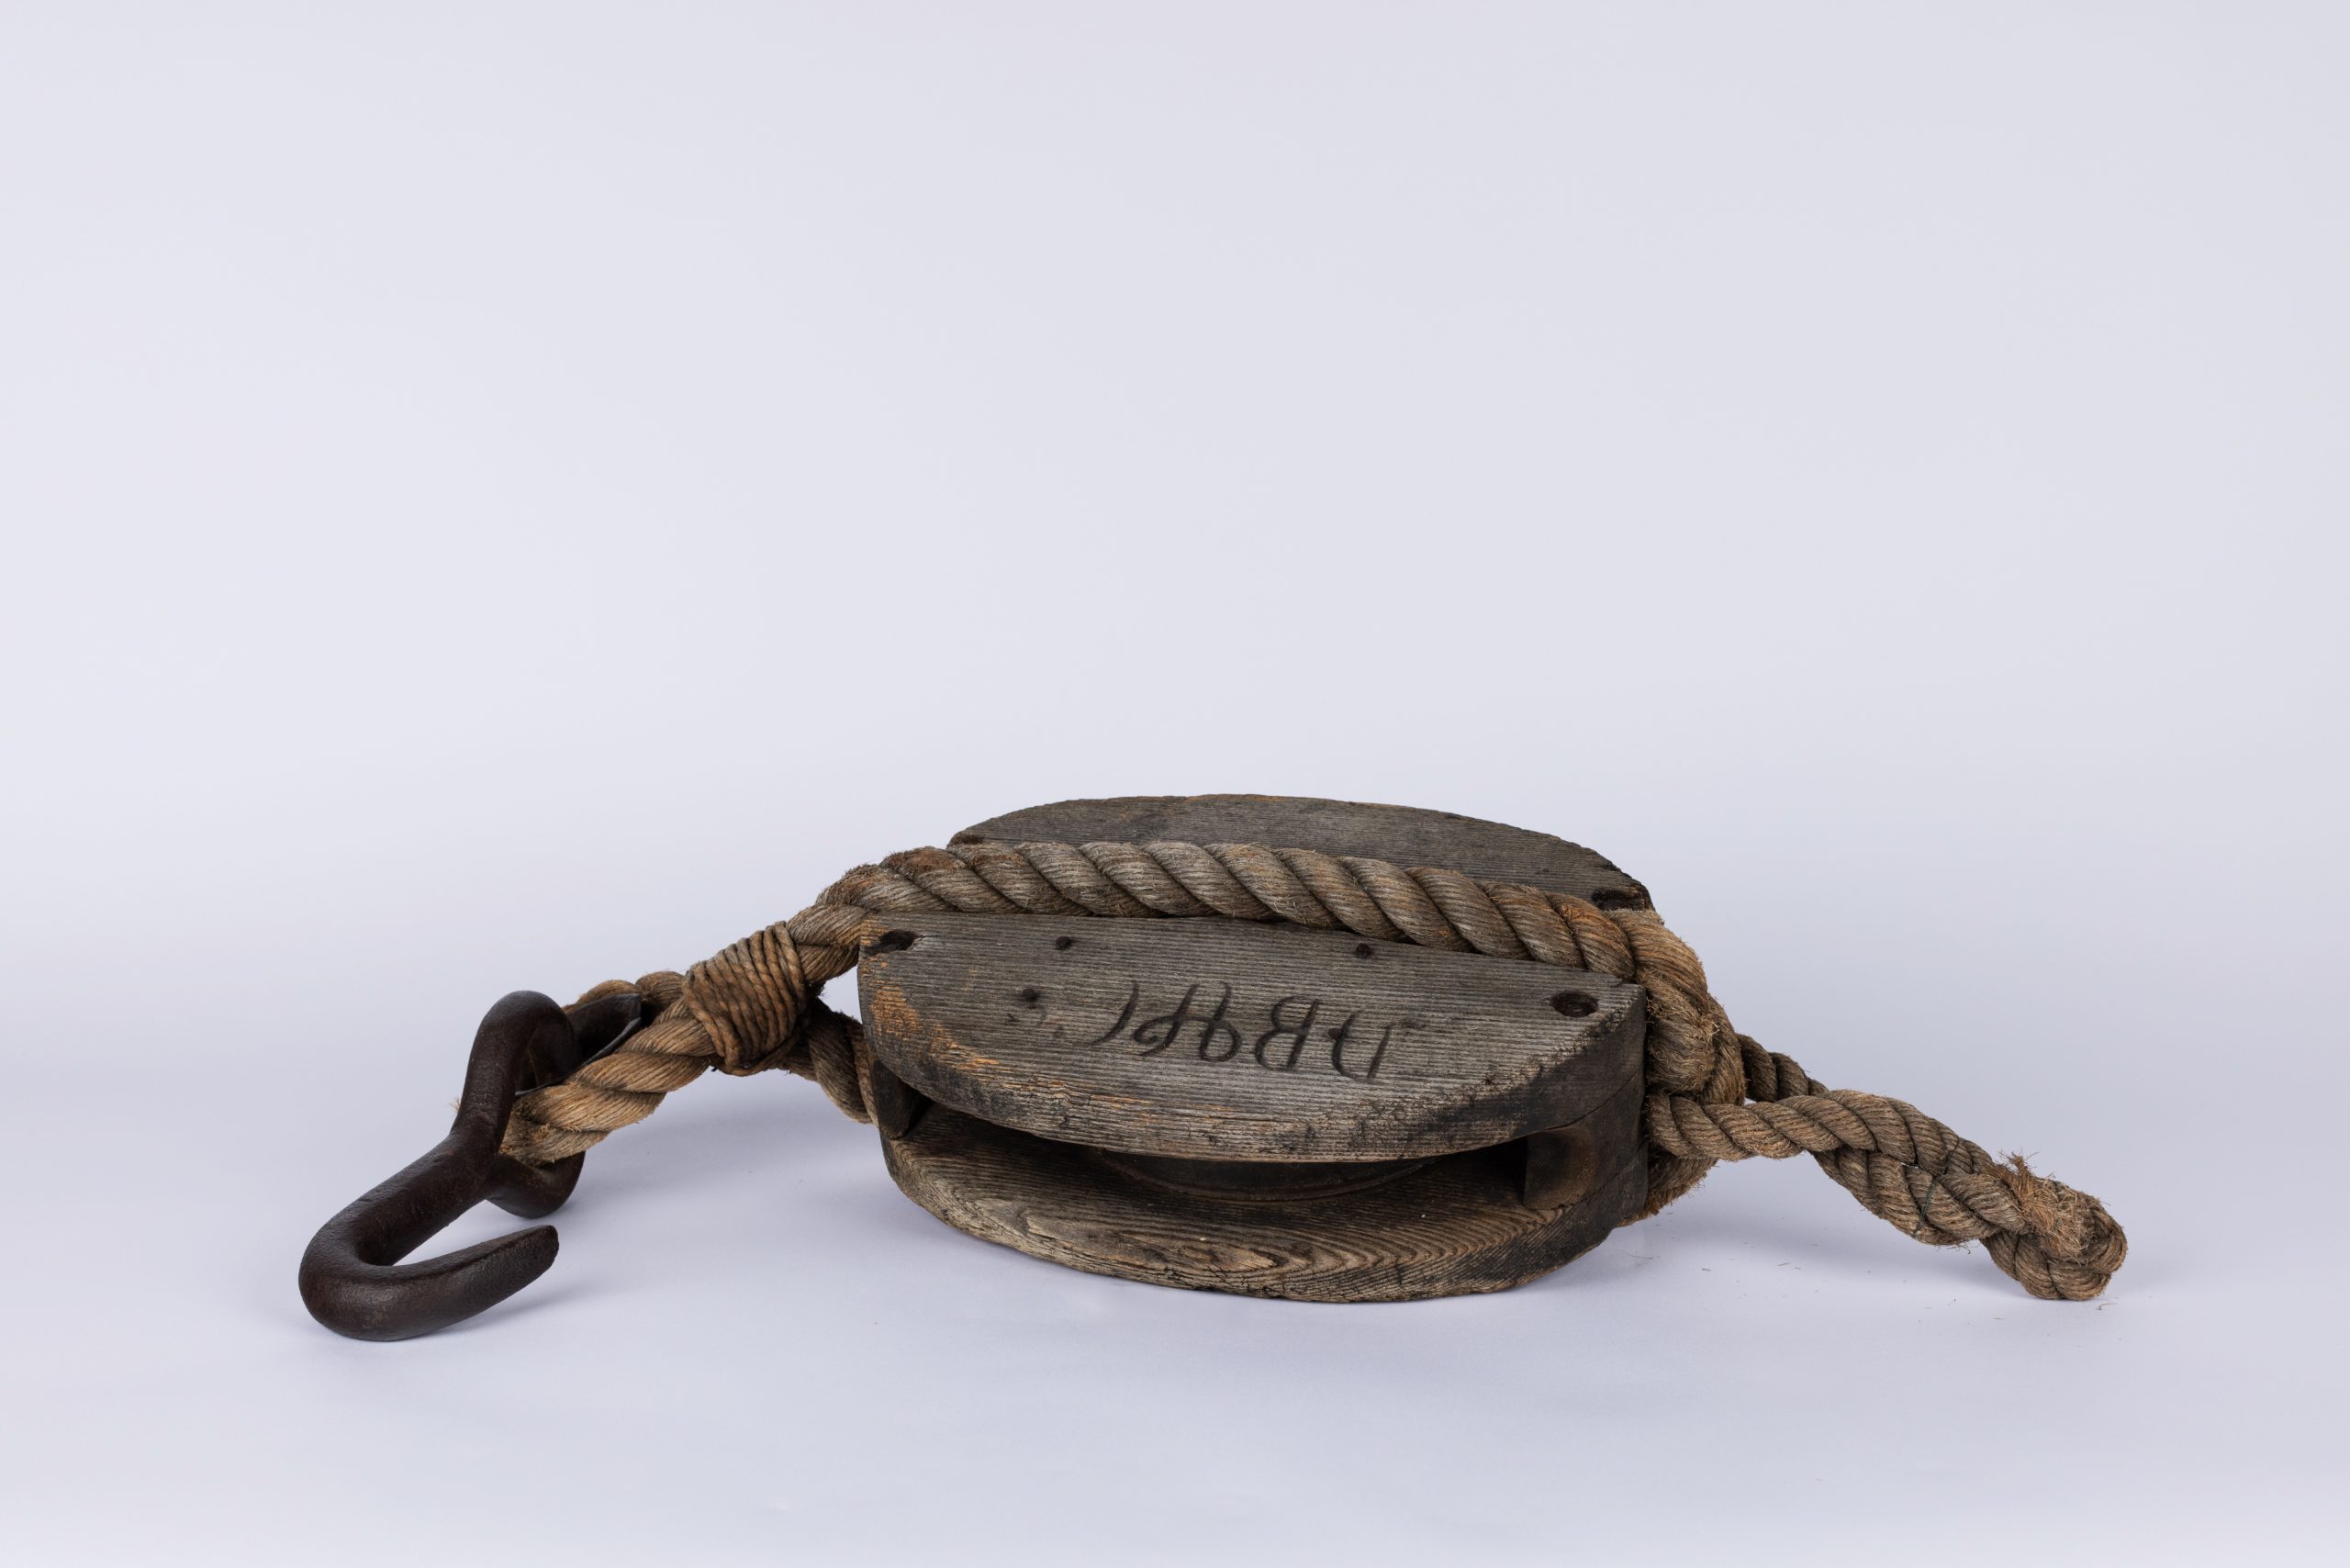 oval wooden block with a metal hook attached to one end, further secured by rope